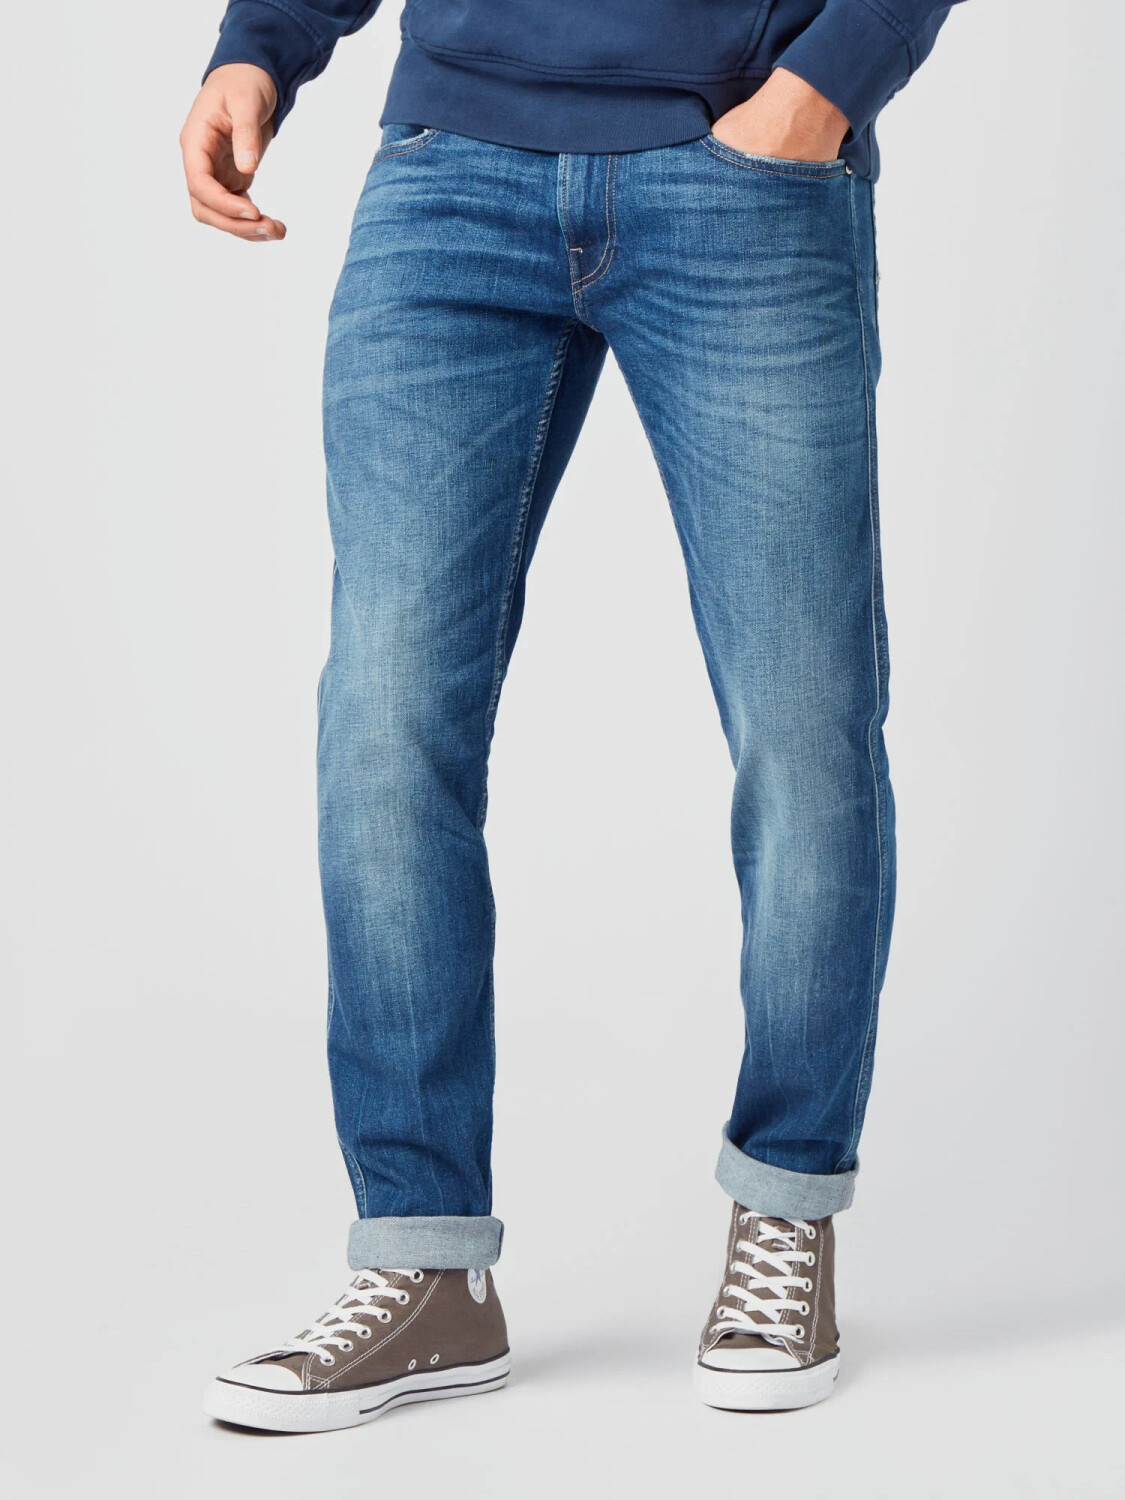 Buy Replay Anbass Hyperflex Slim Fit Jeans medium blue from £39.49 (Today)  – Best Deals on